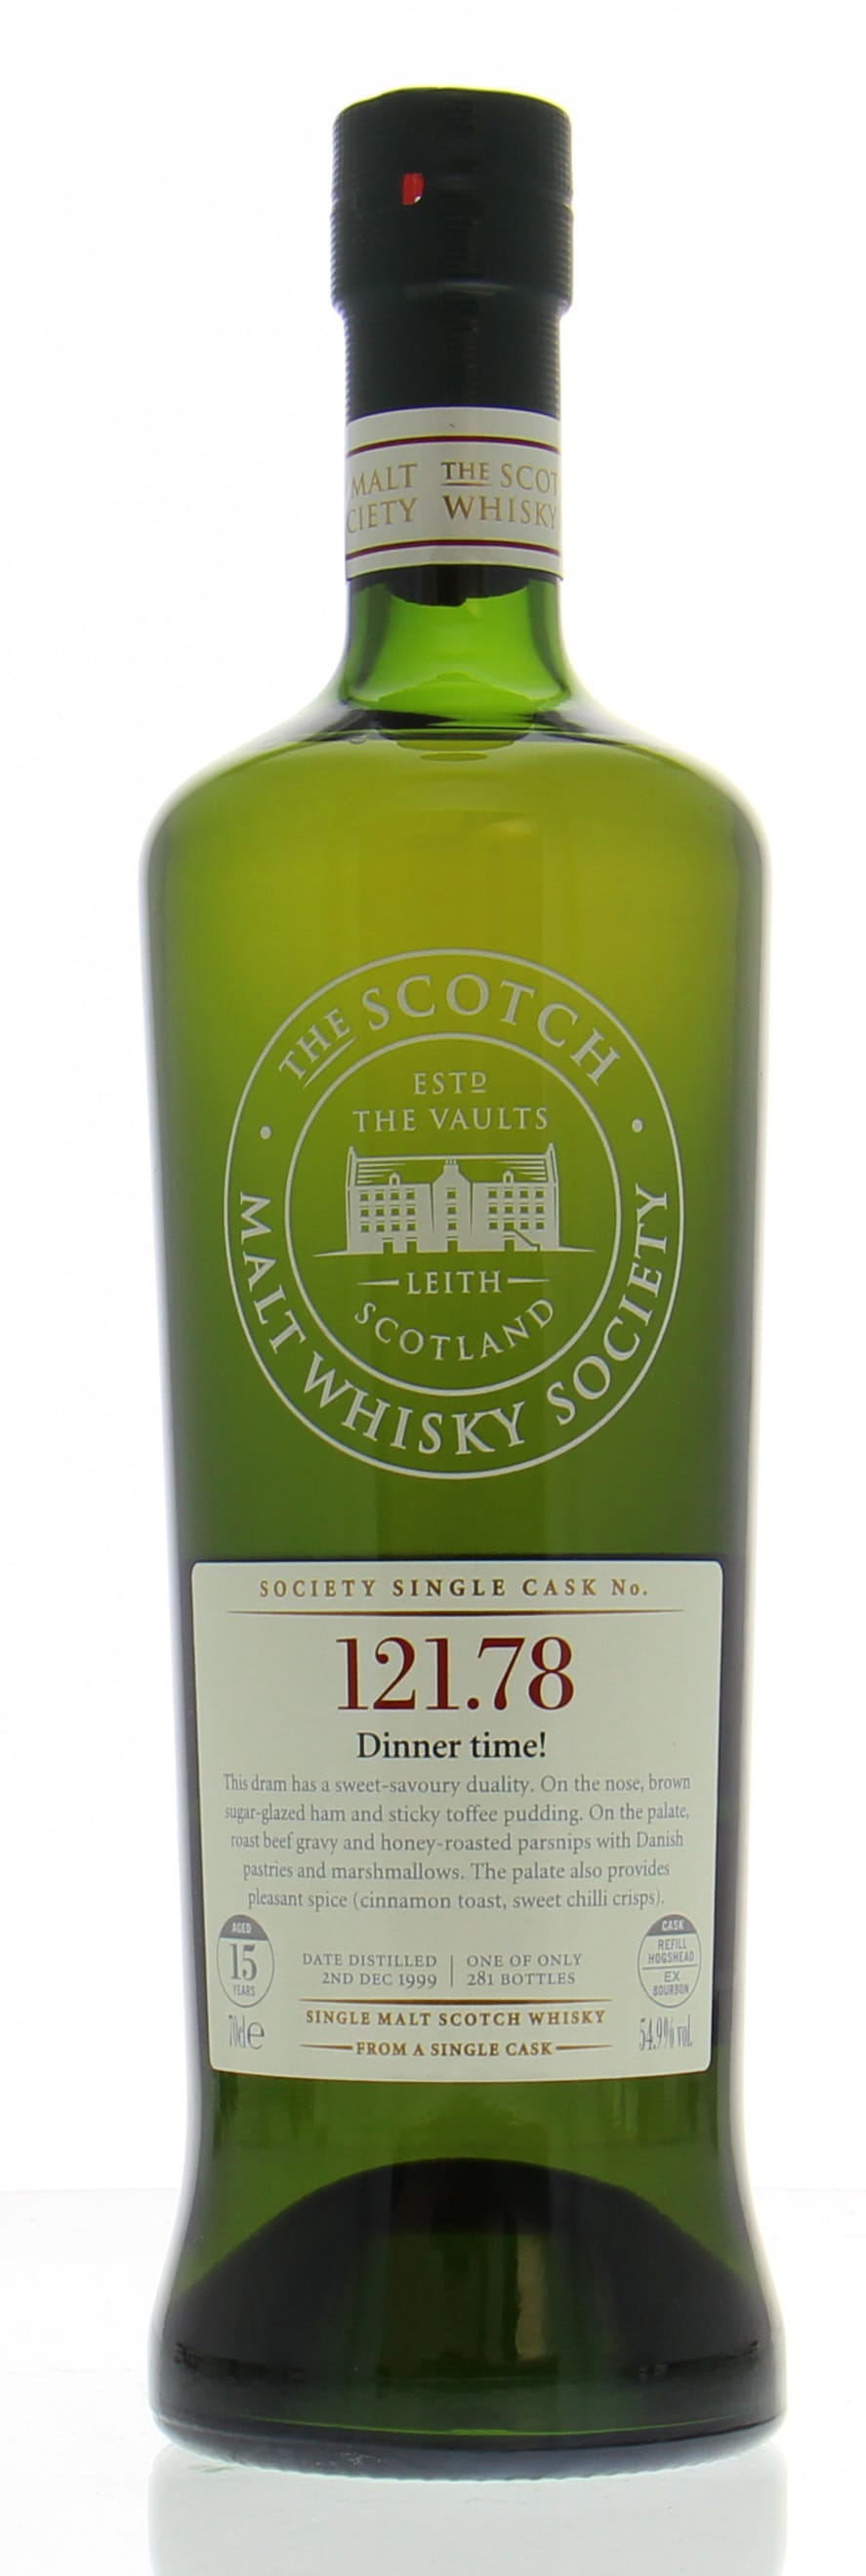 Arran - 15 Years Old SMWS 121.78 Dinner Time 54.9% 1999 Perfect